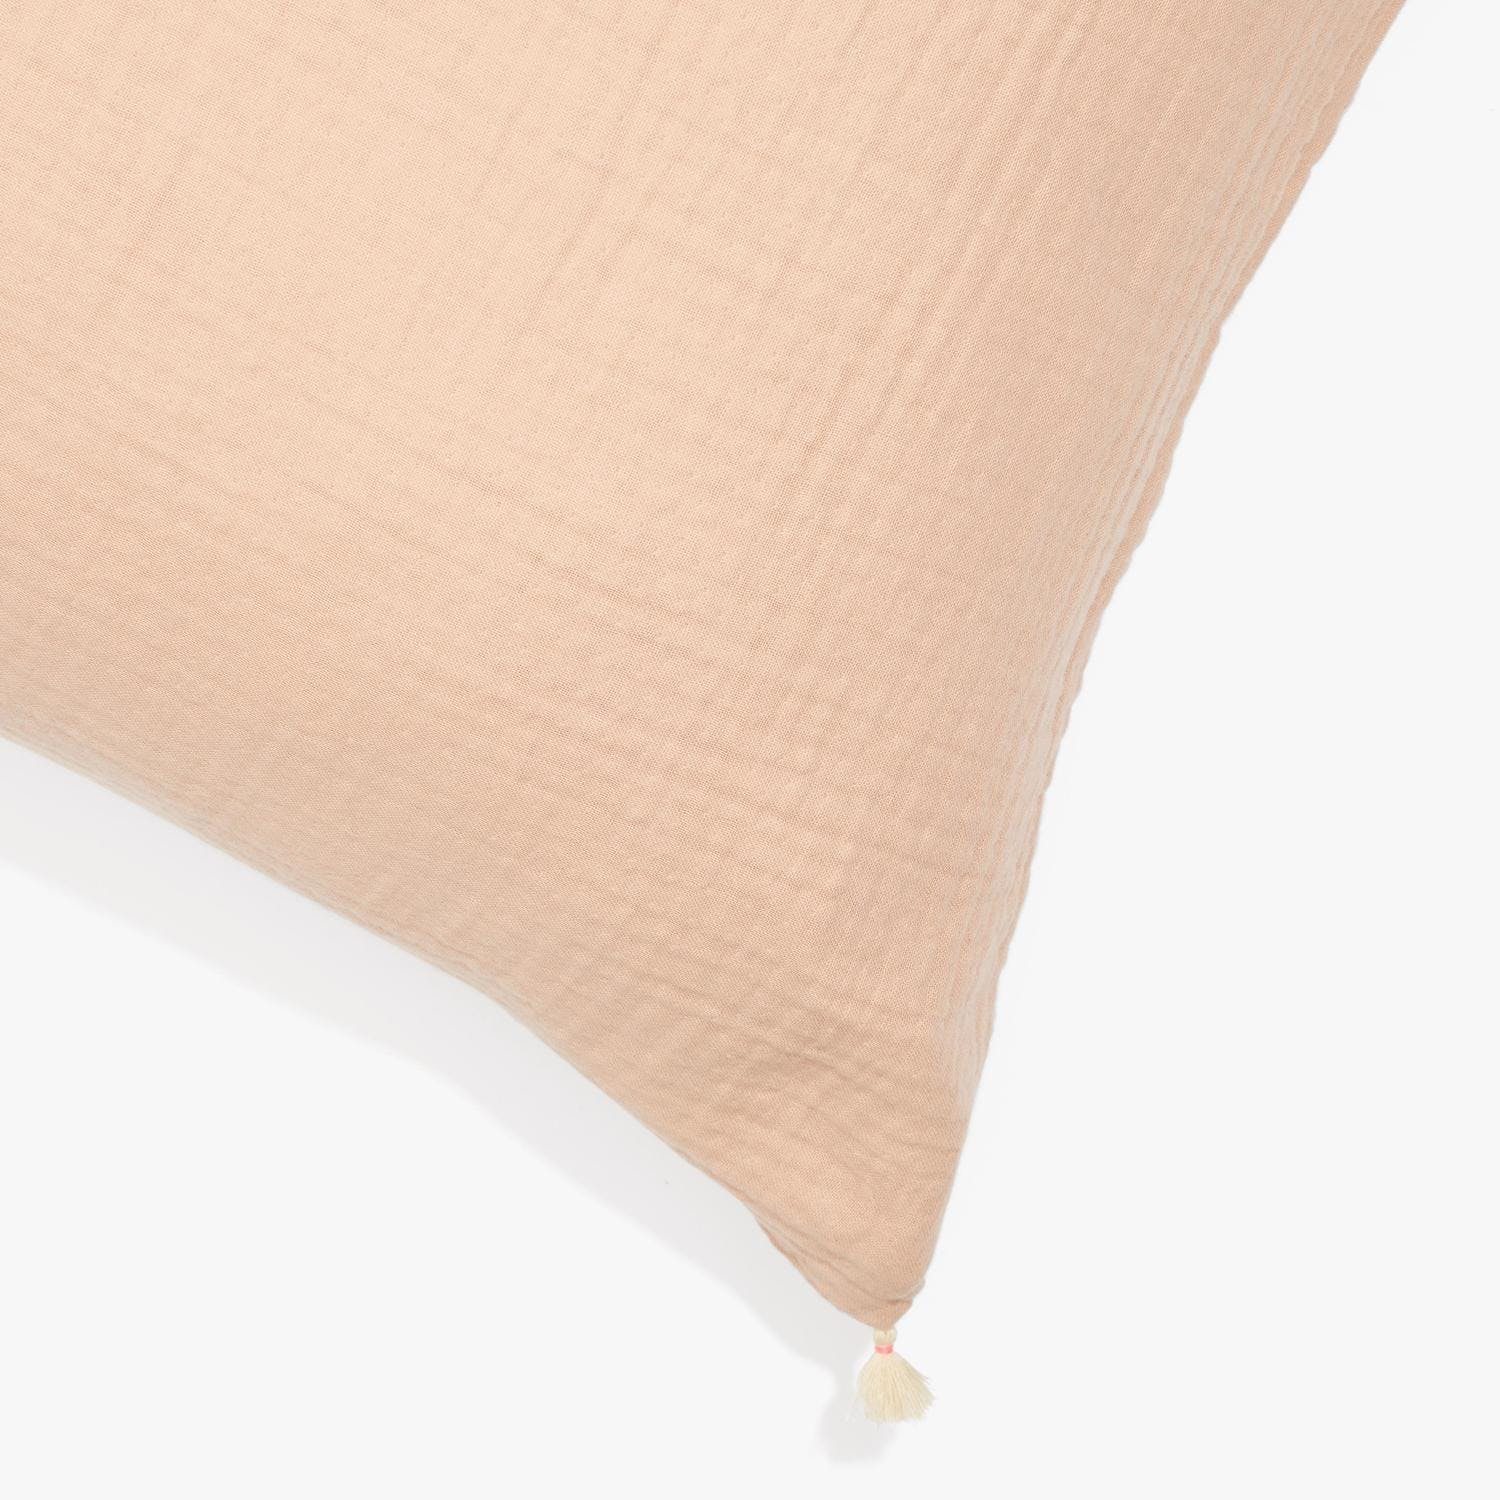 Blush pink linen cushion with crinkled texture and decorative tassel.